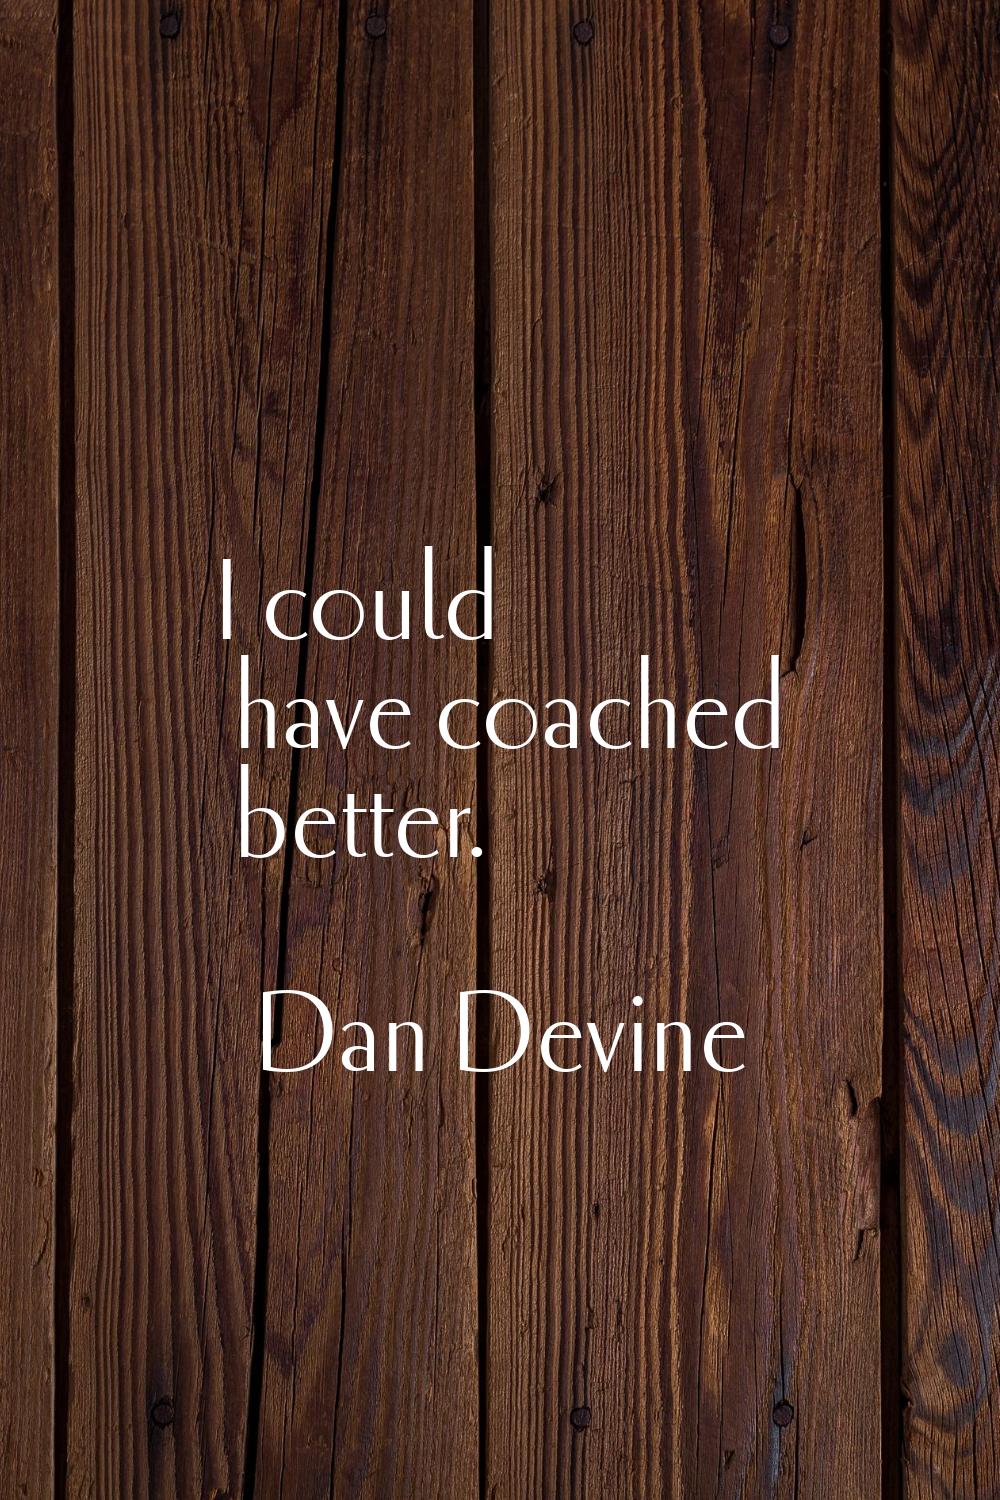 I could have coached better.